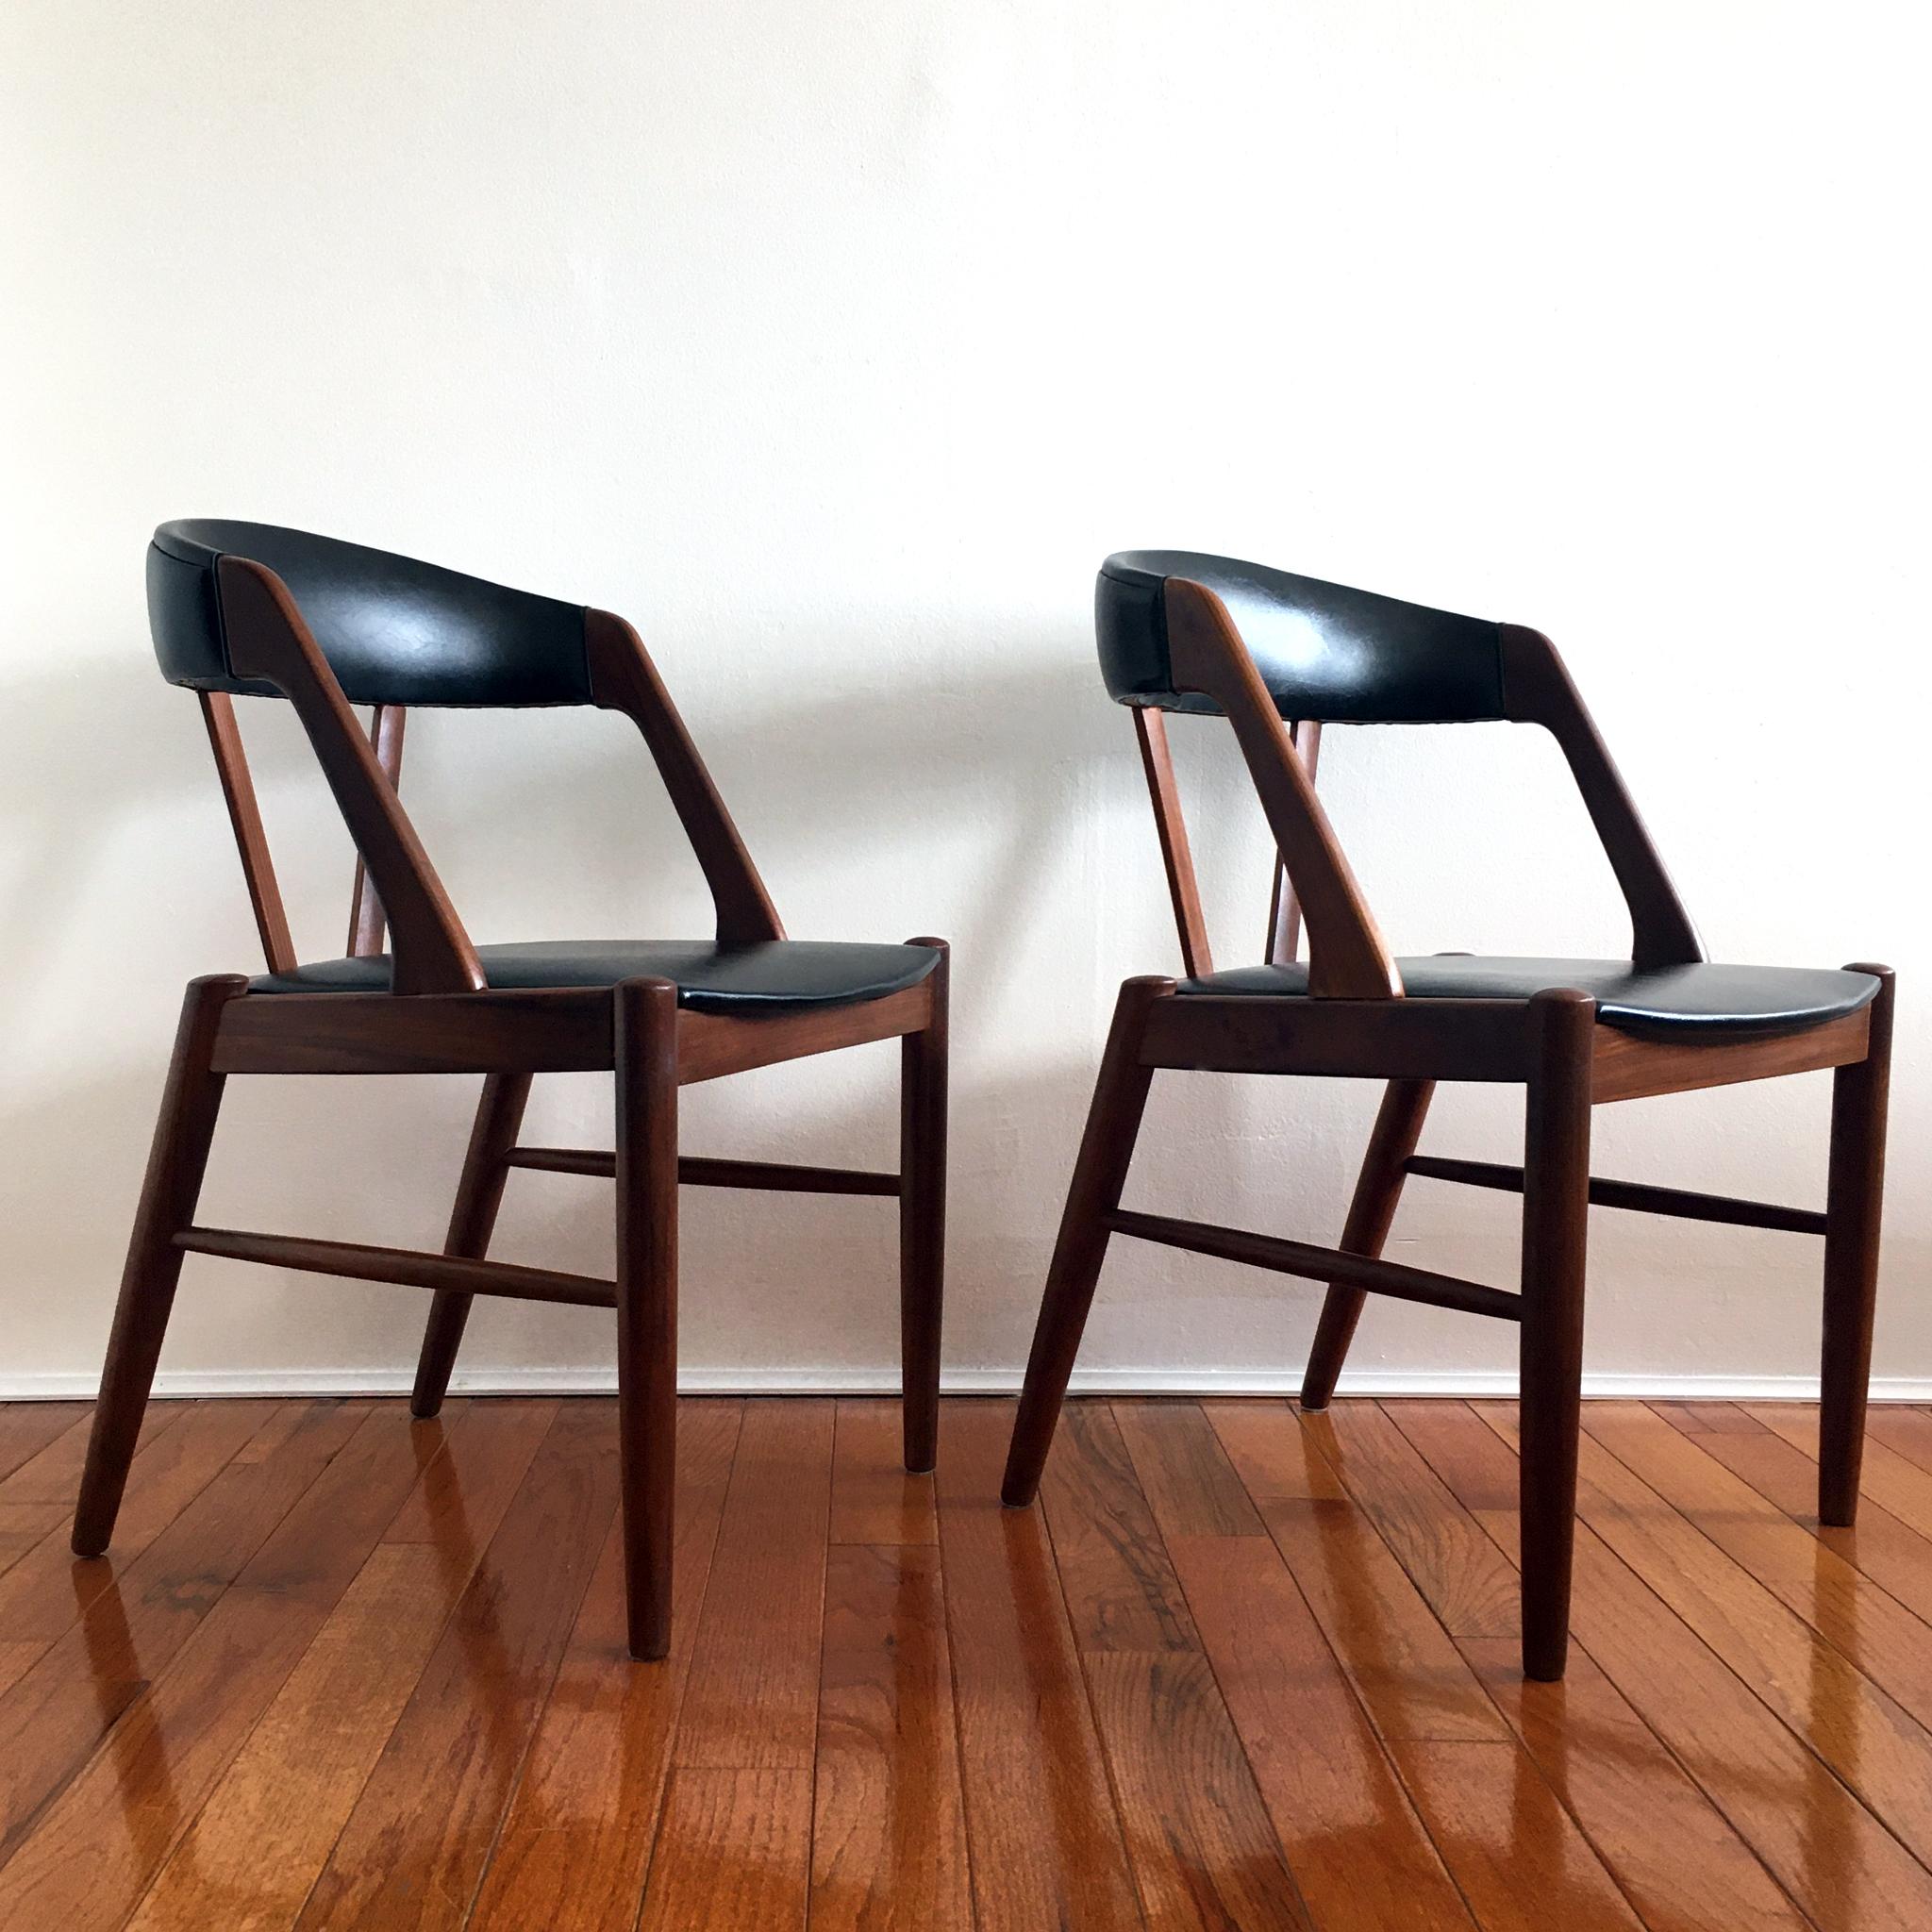 Pair of beautiful midcentury chairs in the style of Kai Kristiansen’s iconic Model 31 chair. Teak frame, with black faux leather seat and chair back.